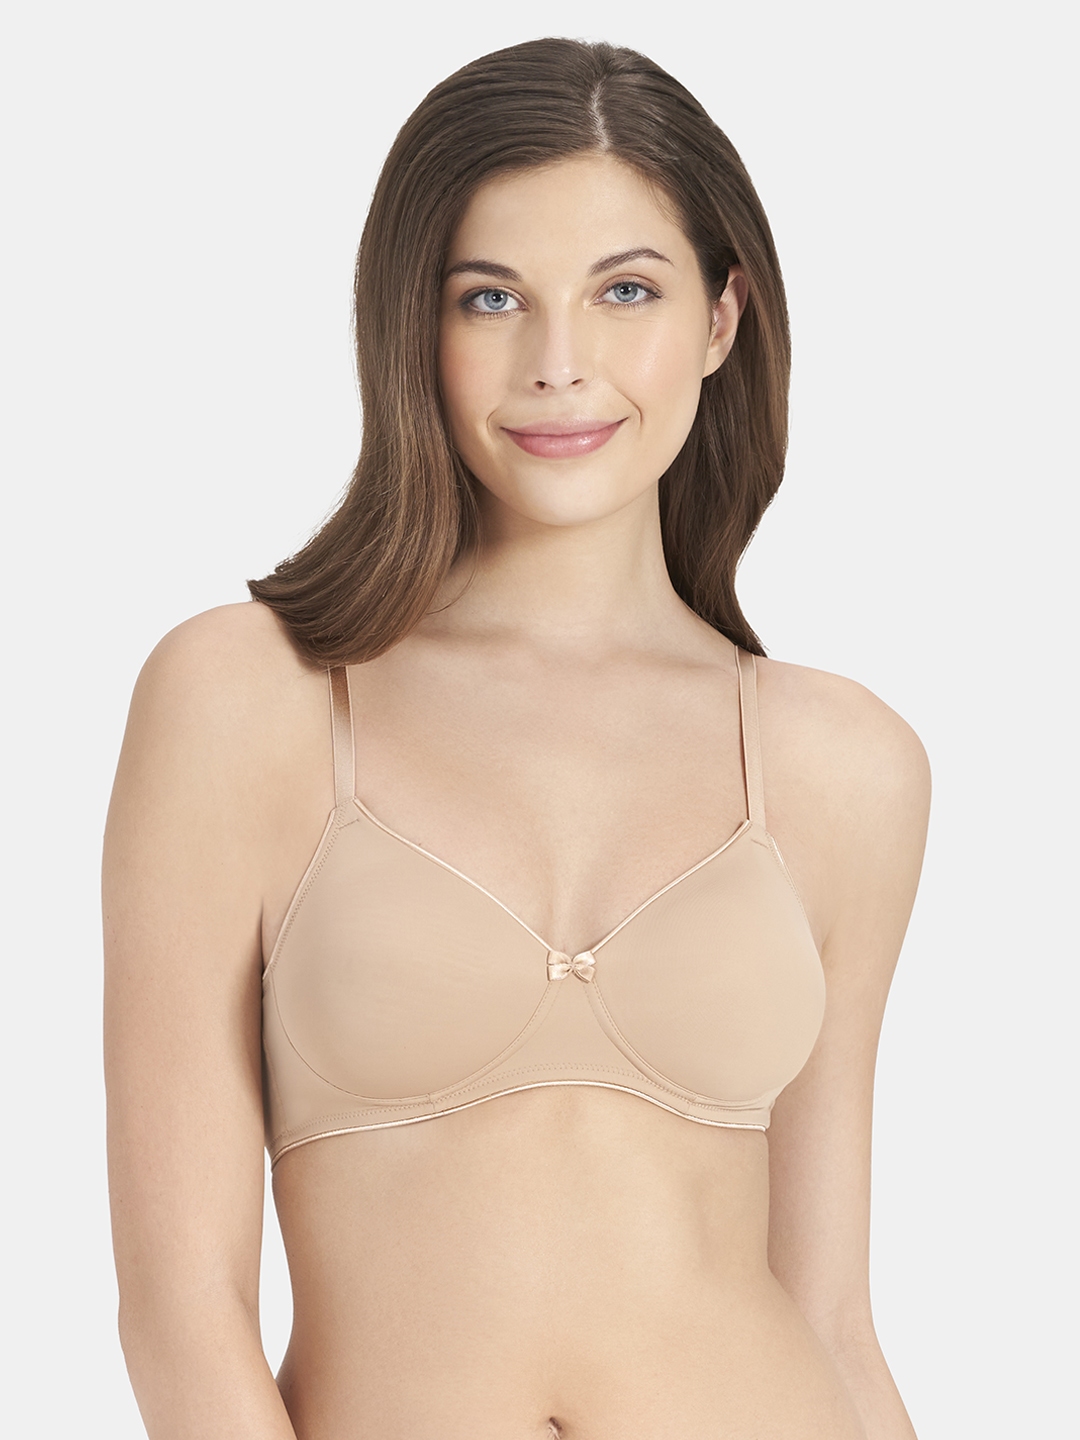 Buy Amante Solid Padded Non-Wired Full Coverage T-Shirt Bra at